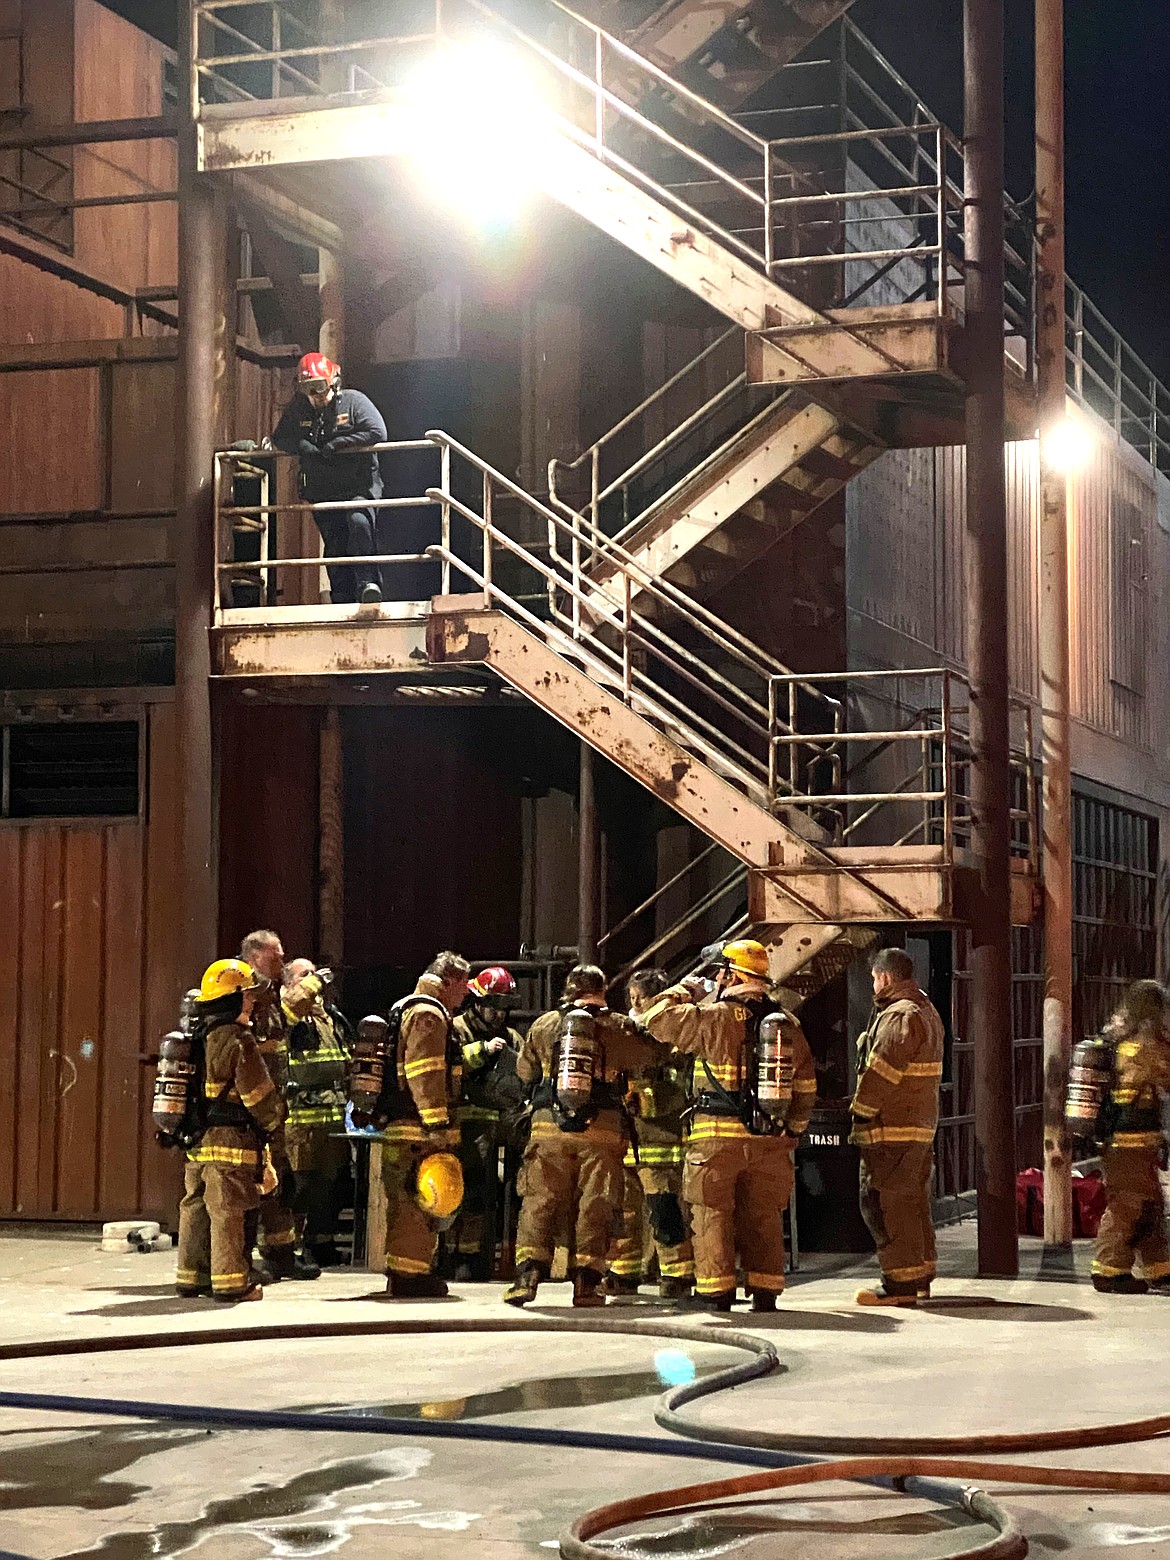 Grant County Fire District personnel gather for a night training exercise.